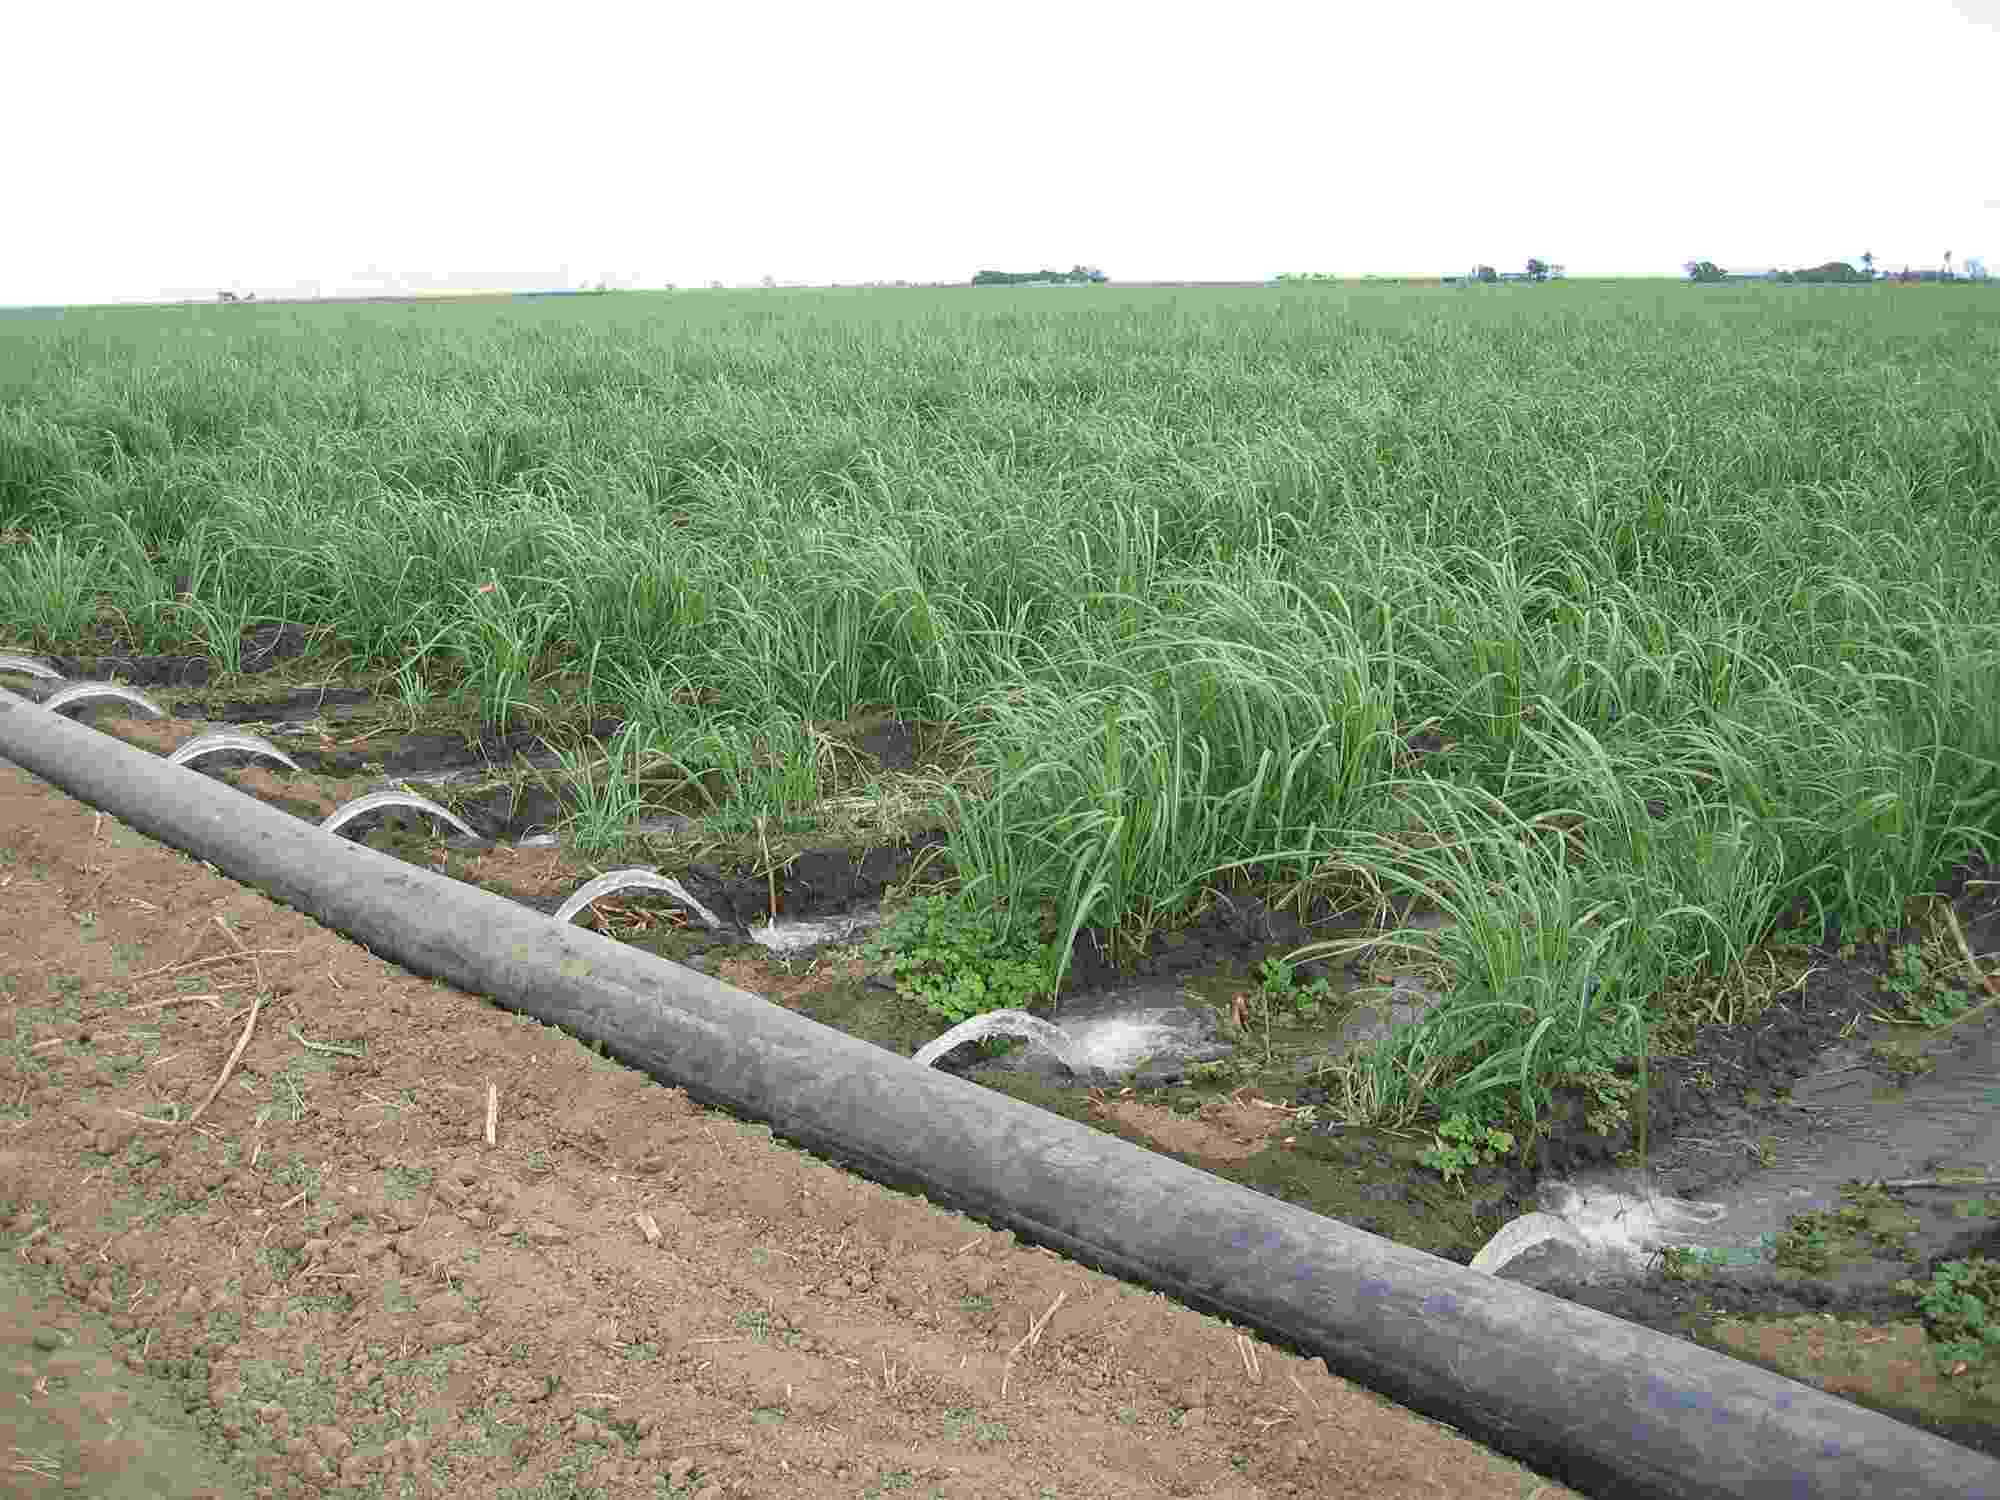 A hydroflume pictured in the foreground delivers small streams of water directly to root channels of young sugar crop plants